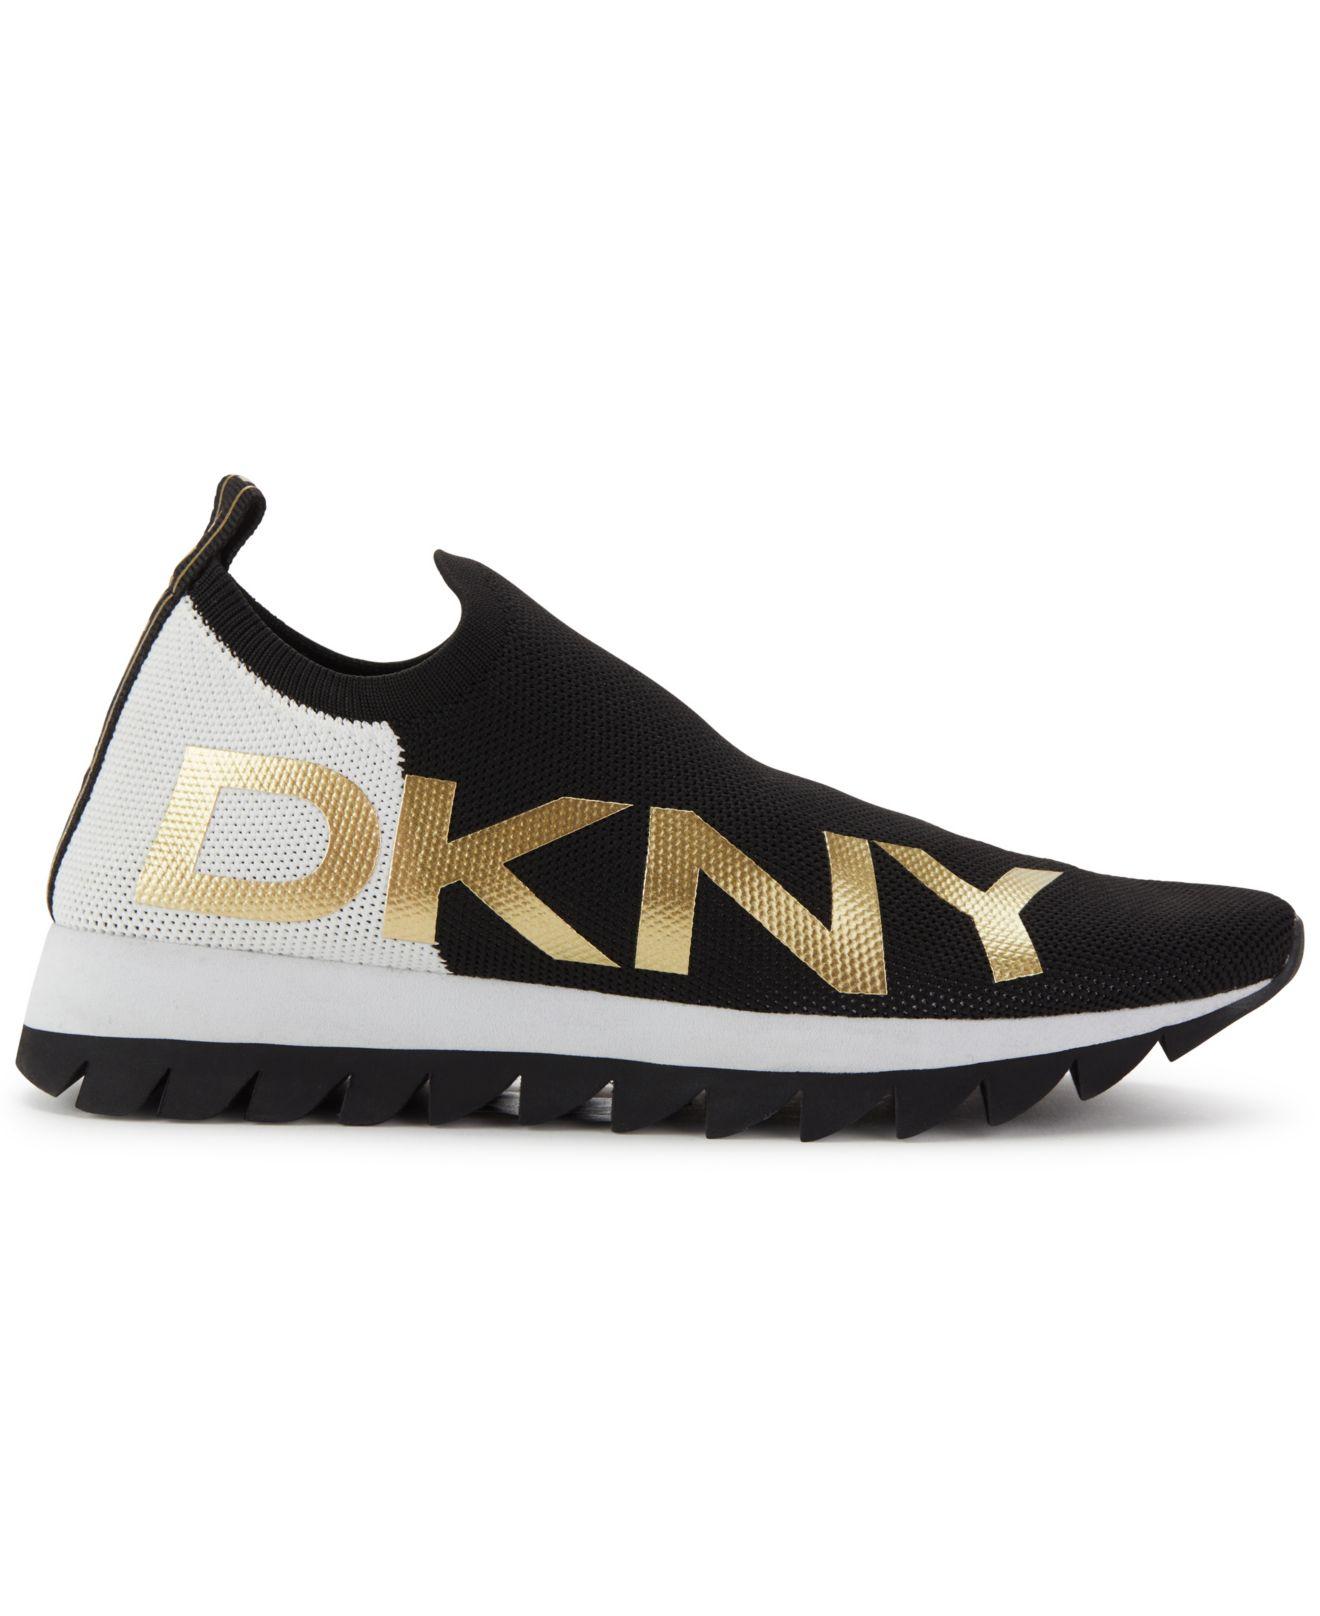 DKNY Azer Sneakers in Black/White (Black) - Save 59% | Lyst